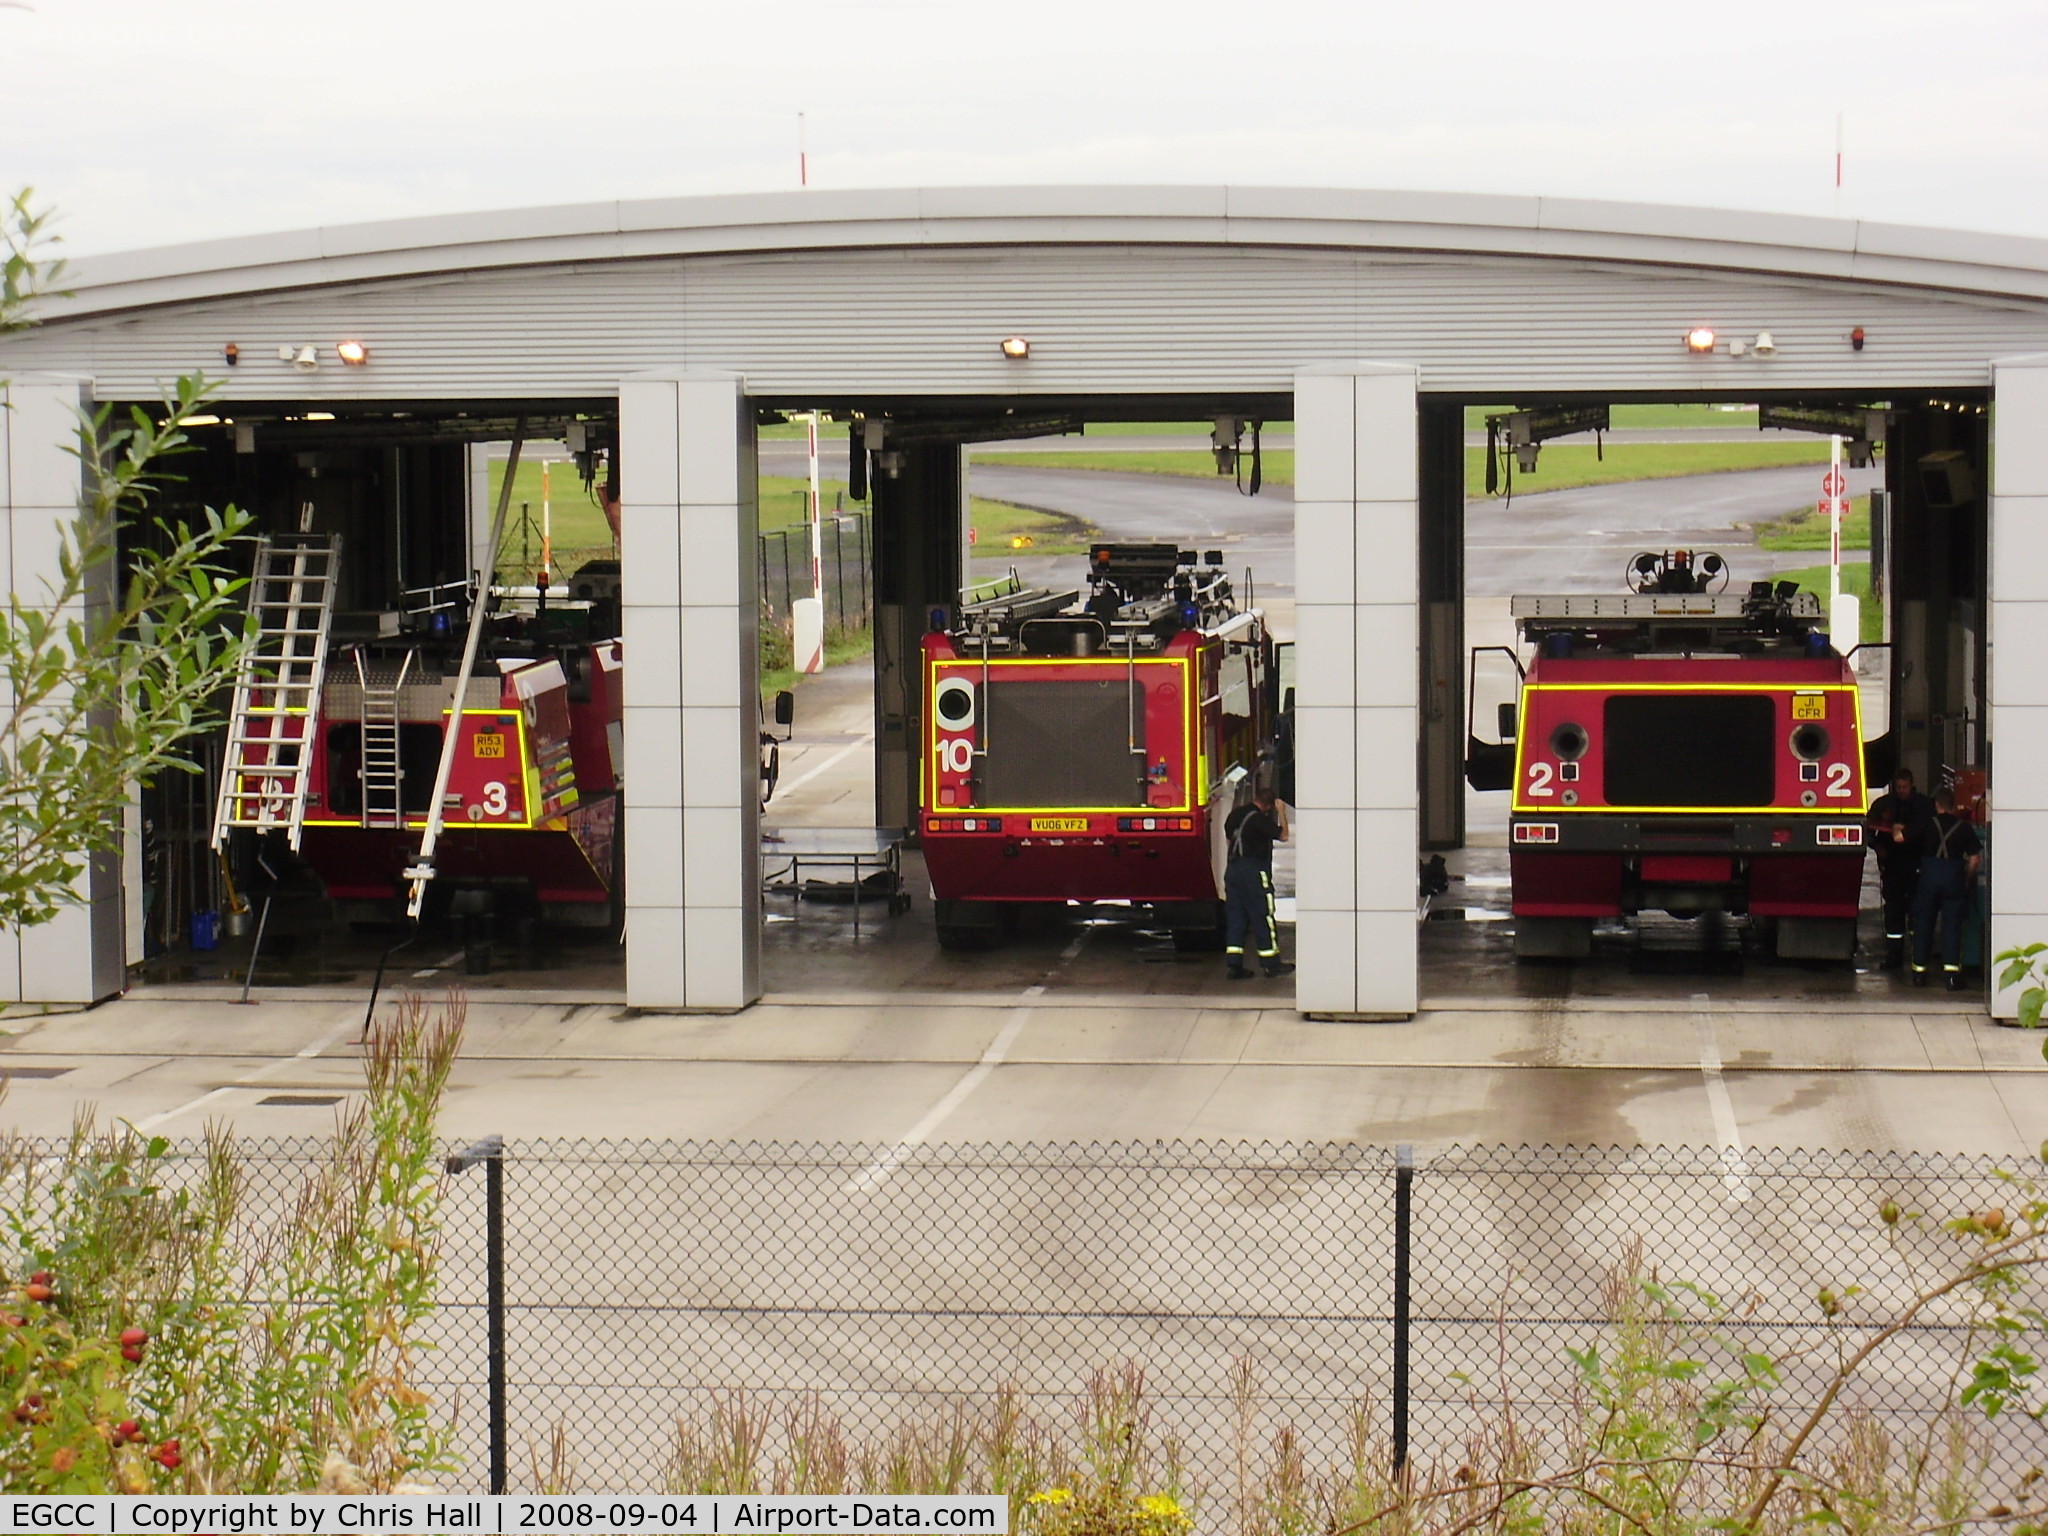 Manchester Airport, Manchester, England United Kingdom (EGCC) - The new Fire Station at EGCC